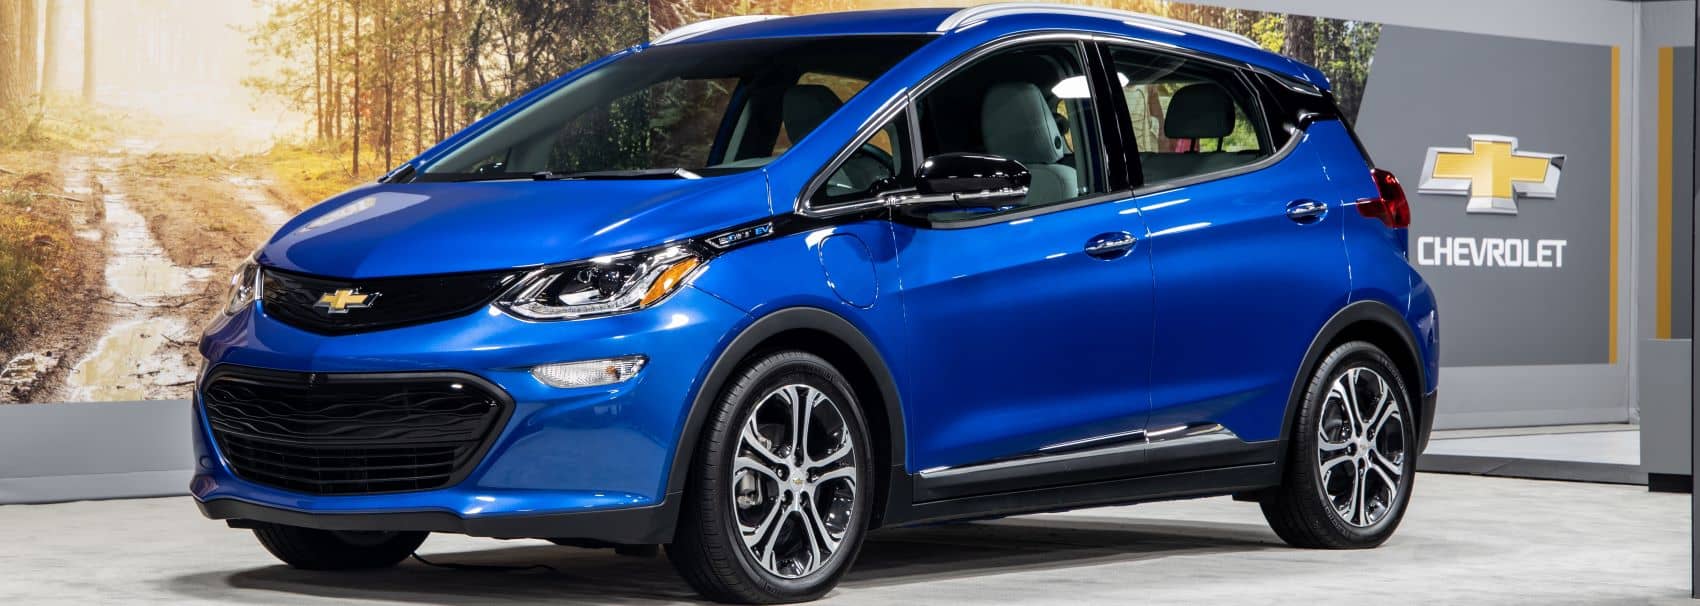 Electric Blue Chevy Bolt on Display